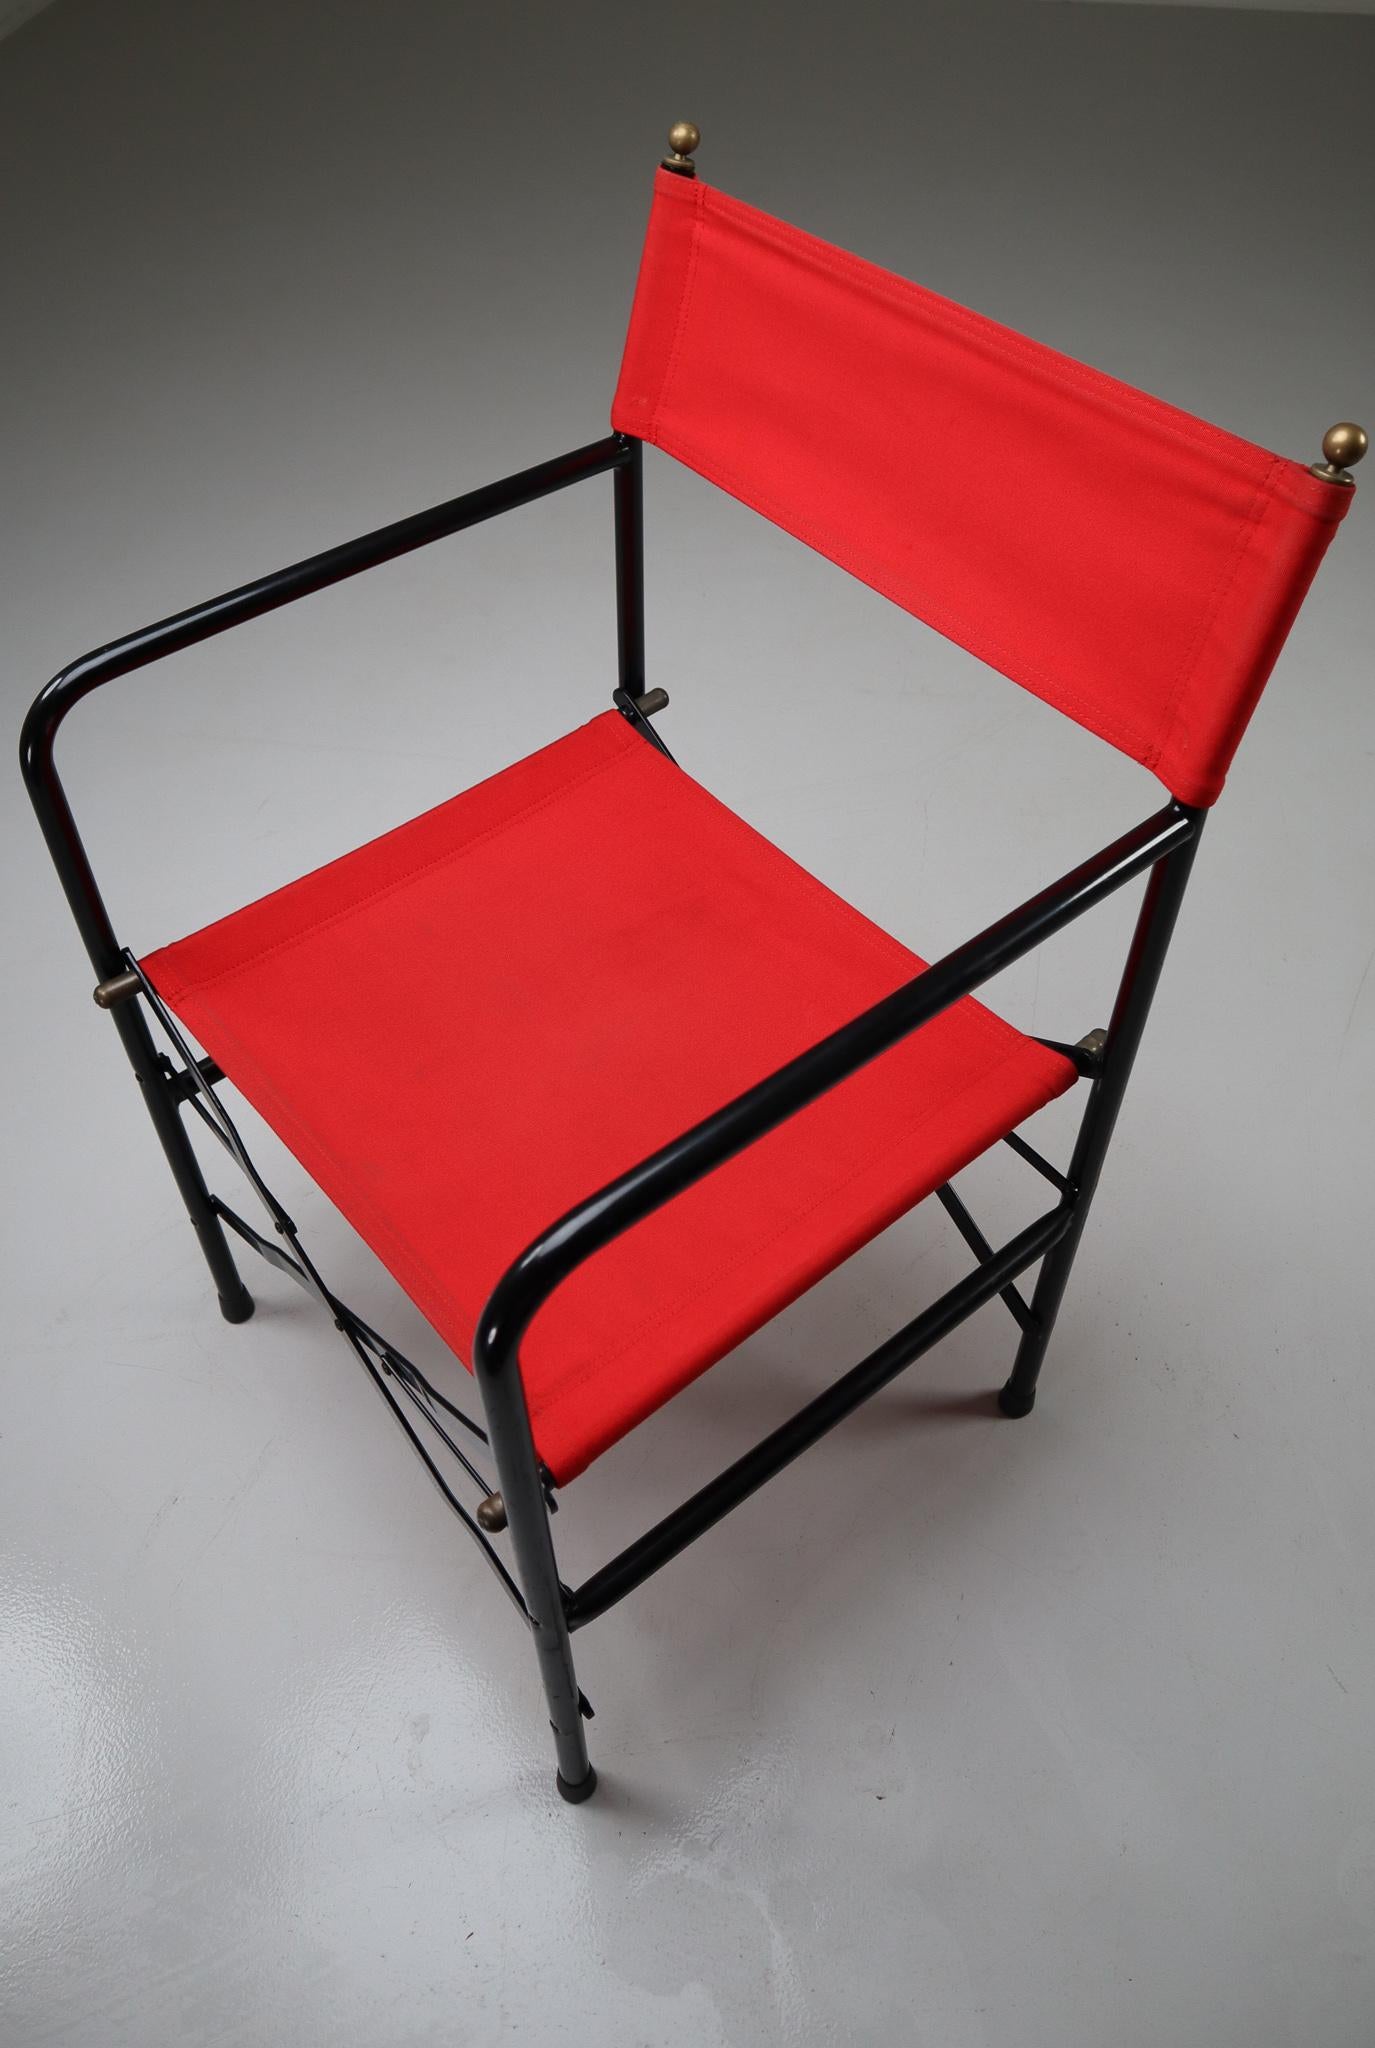 18 Venetian Folding-Patio-Garden Chairs in Steel, Brass and Red Fabric, 1980s For Sale 2